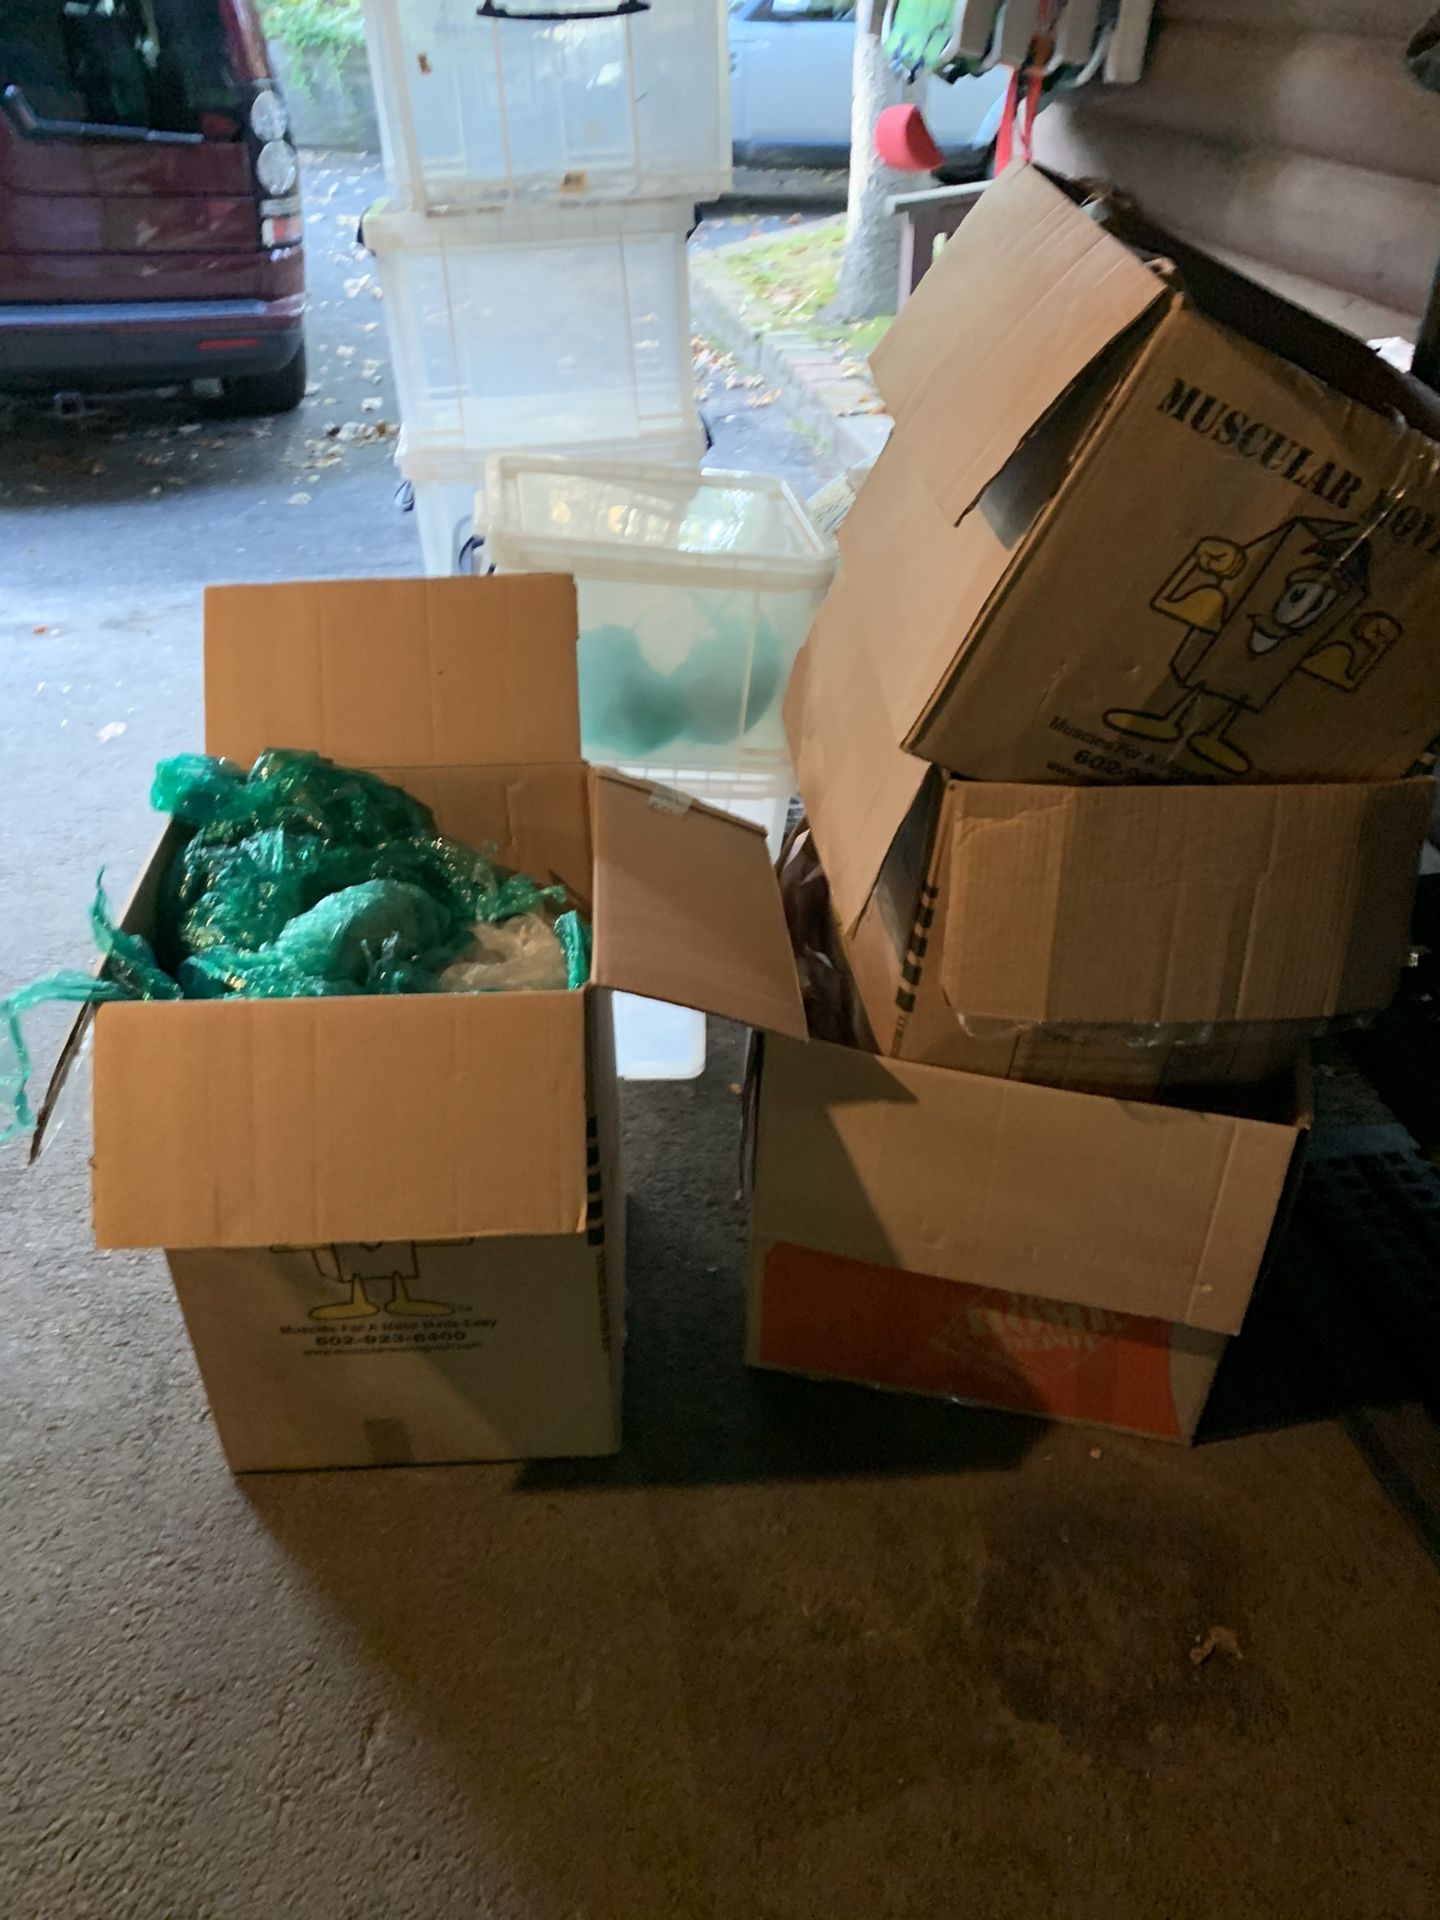 Free packing material for boxes